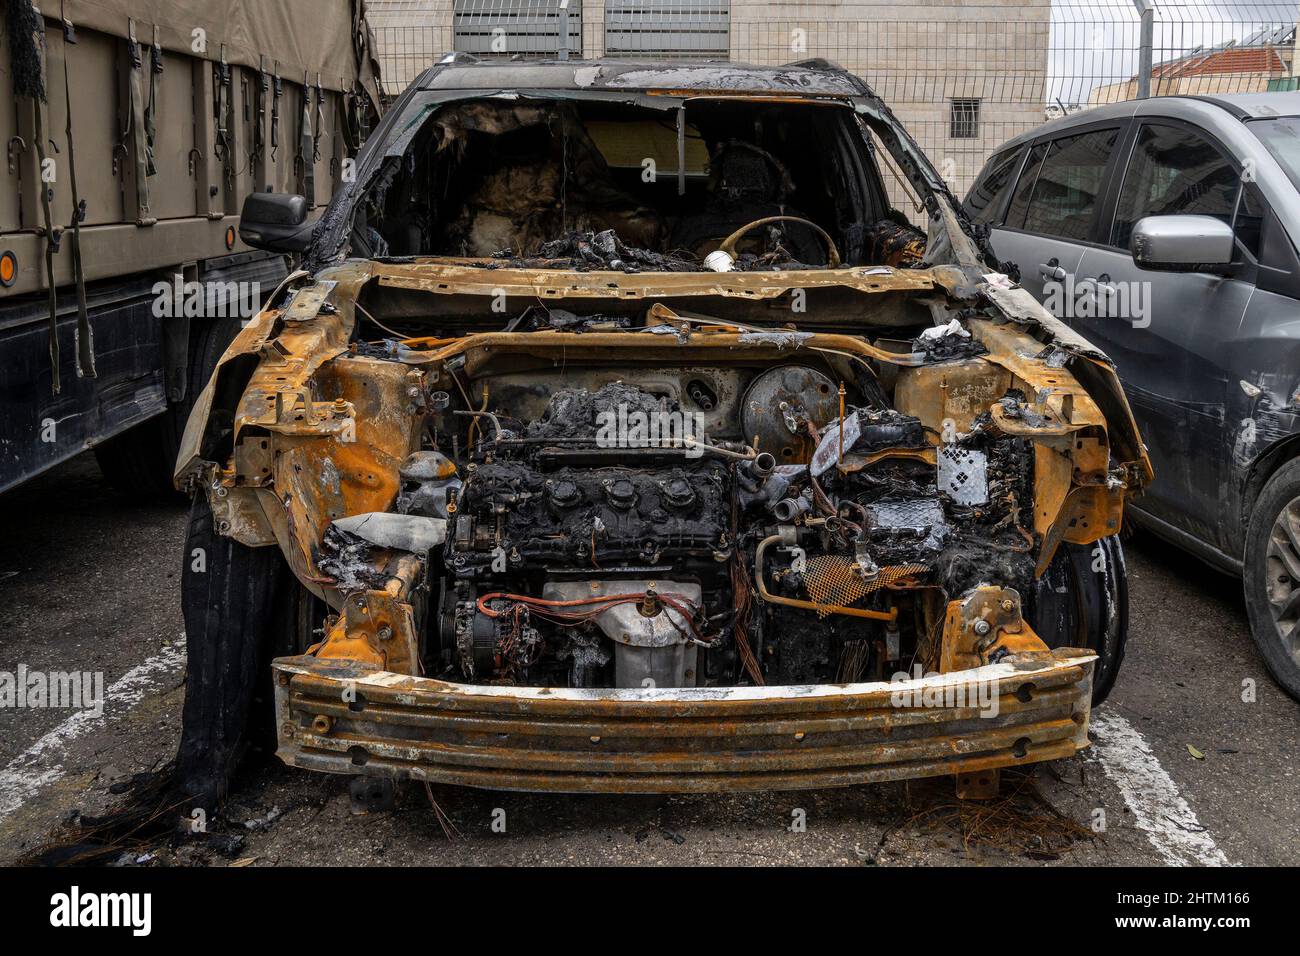 A damage caused by fire to a car that was totally burnt, inside and out. Stock Photo